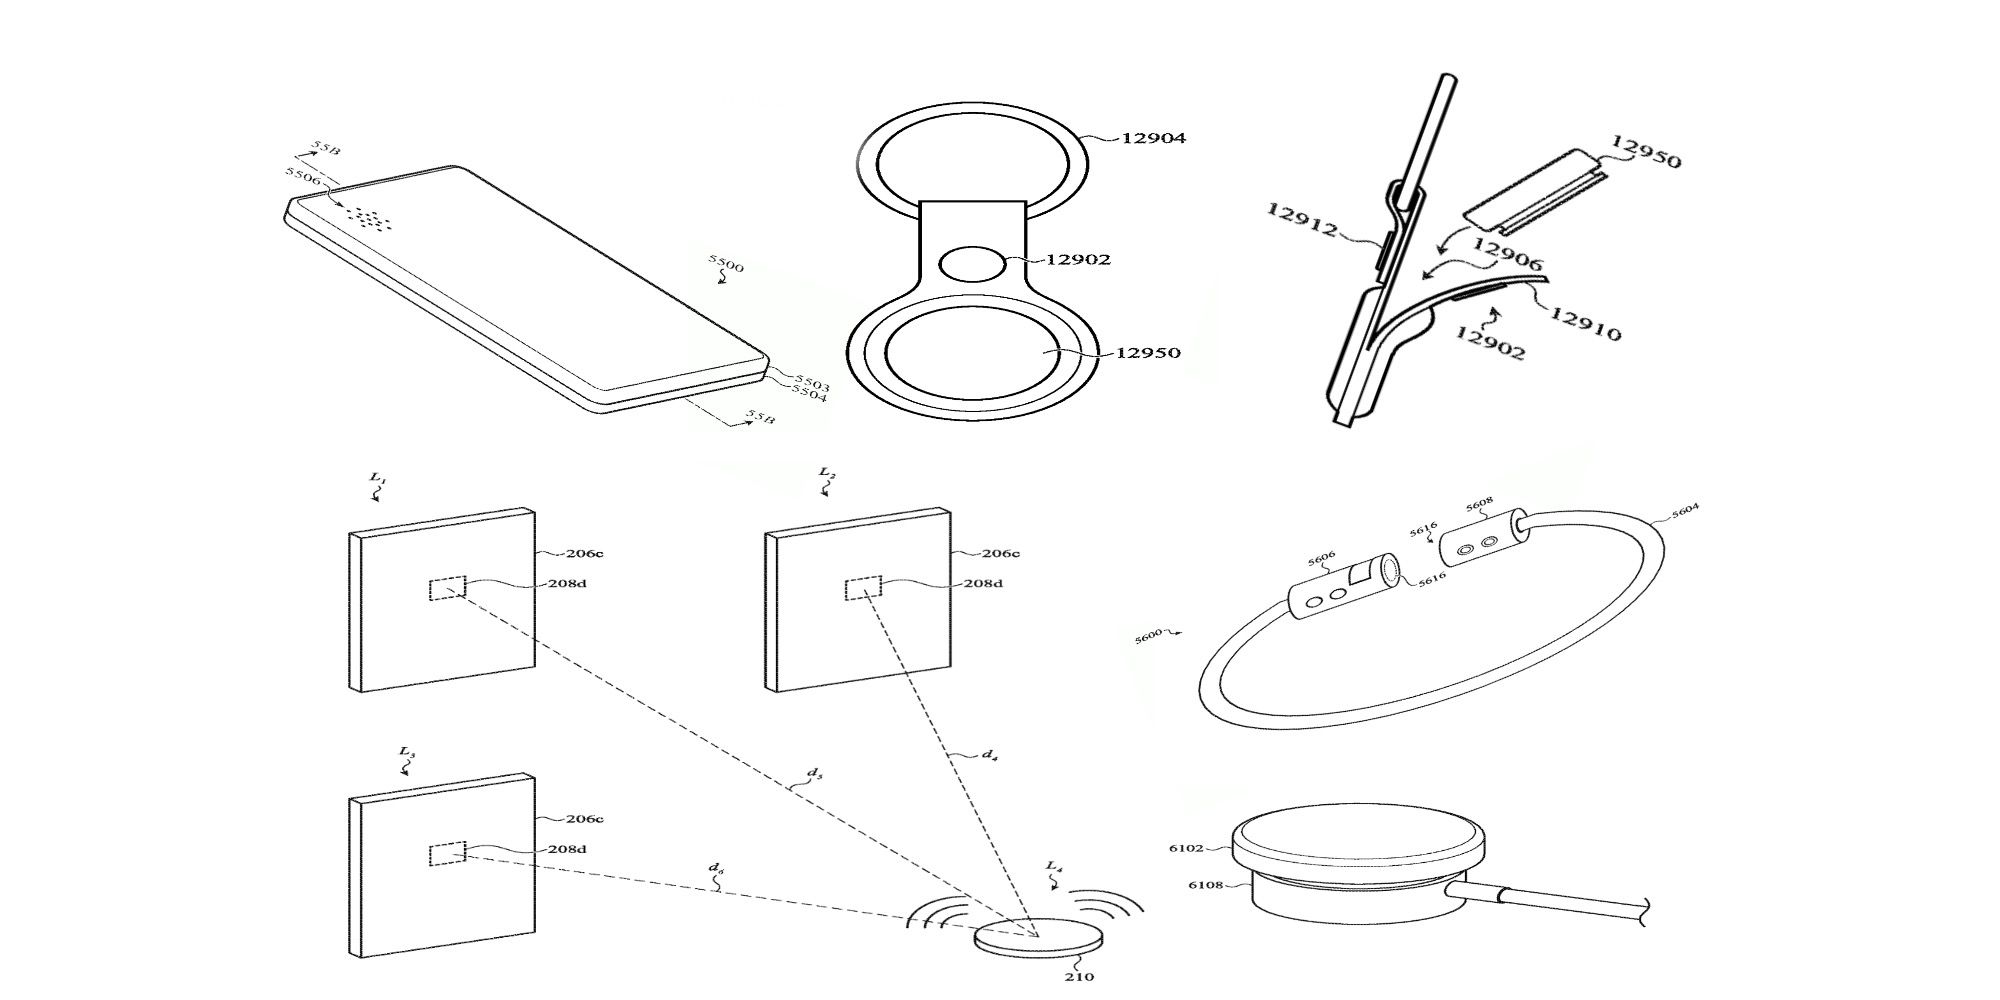 Apple AirTag Patents Explain Location Tracking & Navigation Potential